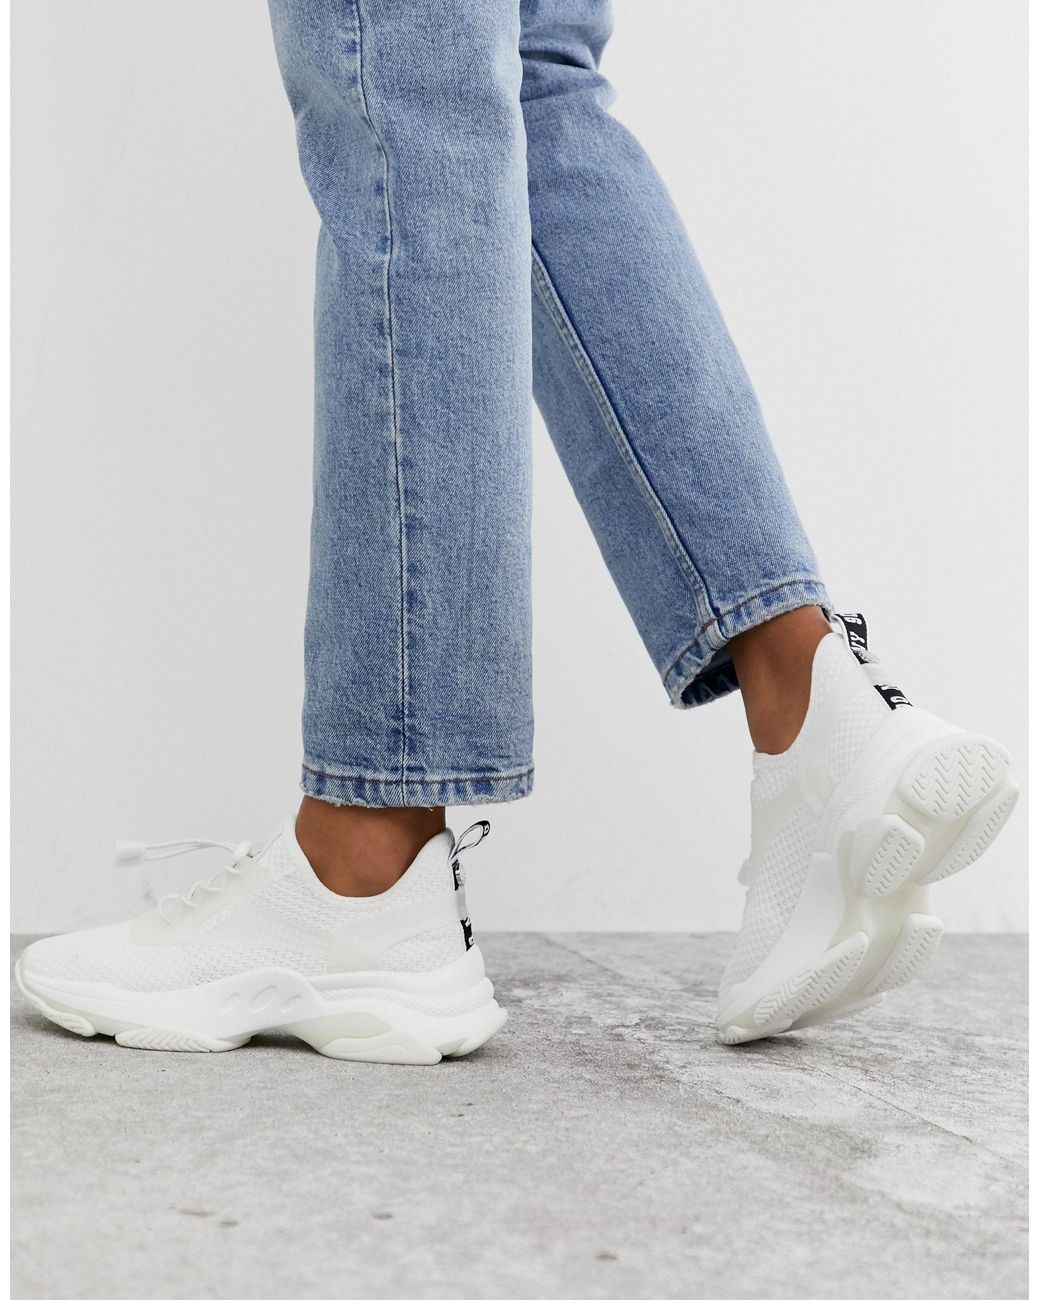 Steve Madden Match White Chunky Trainers Online Sale, UP TO 50% OFF